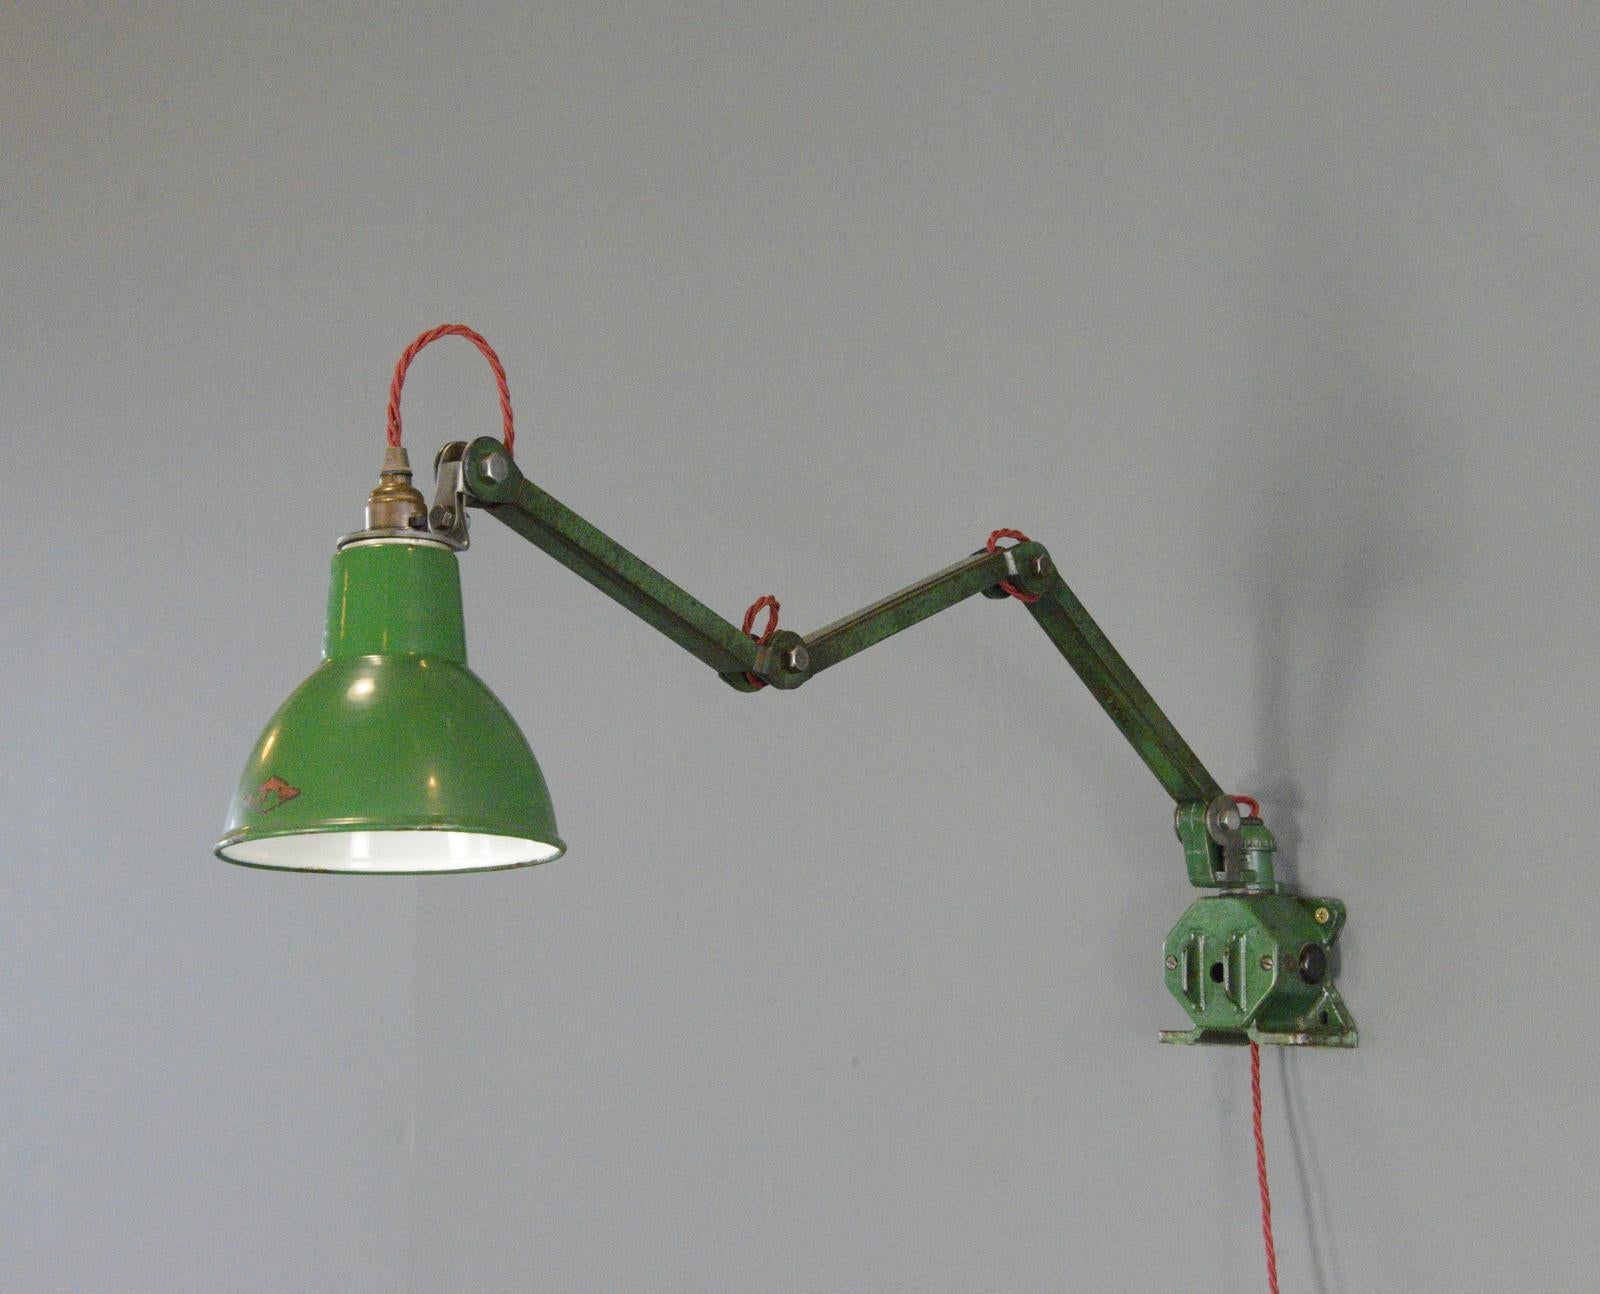 Wall Mounted Task Lamp By EDL Circa 1930s

- Vitreous green enamel shade
- Articulated arms and shade
- Takes B22 fitting bulbs
- On/Off switch on the shade
- Made by EDL, Stafford
- English ~ 1930s
- 15cm wide 
- Extends up to 125cm from the